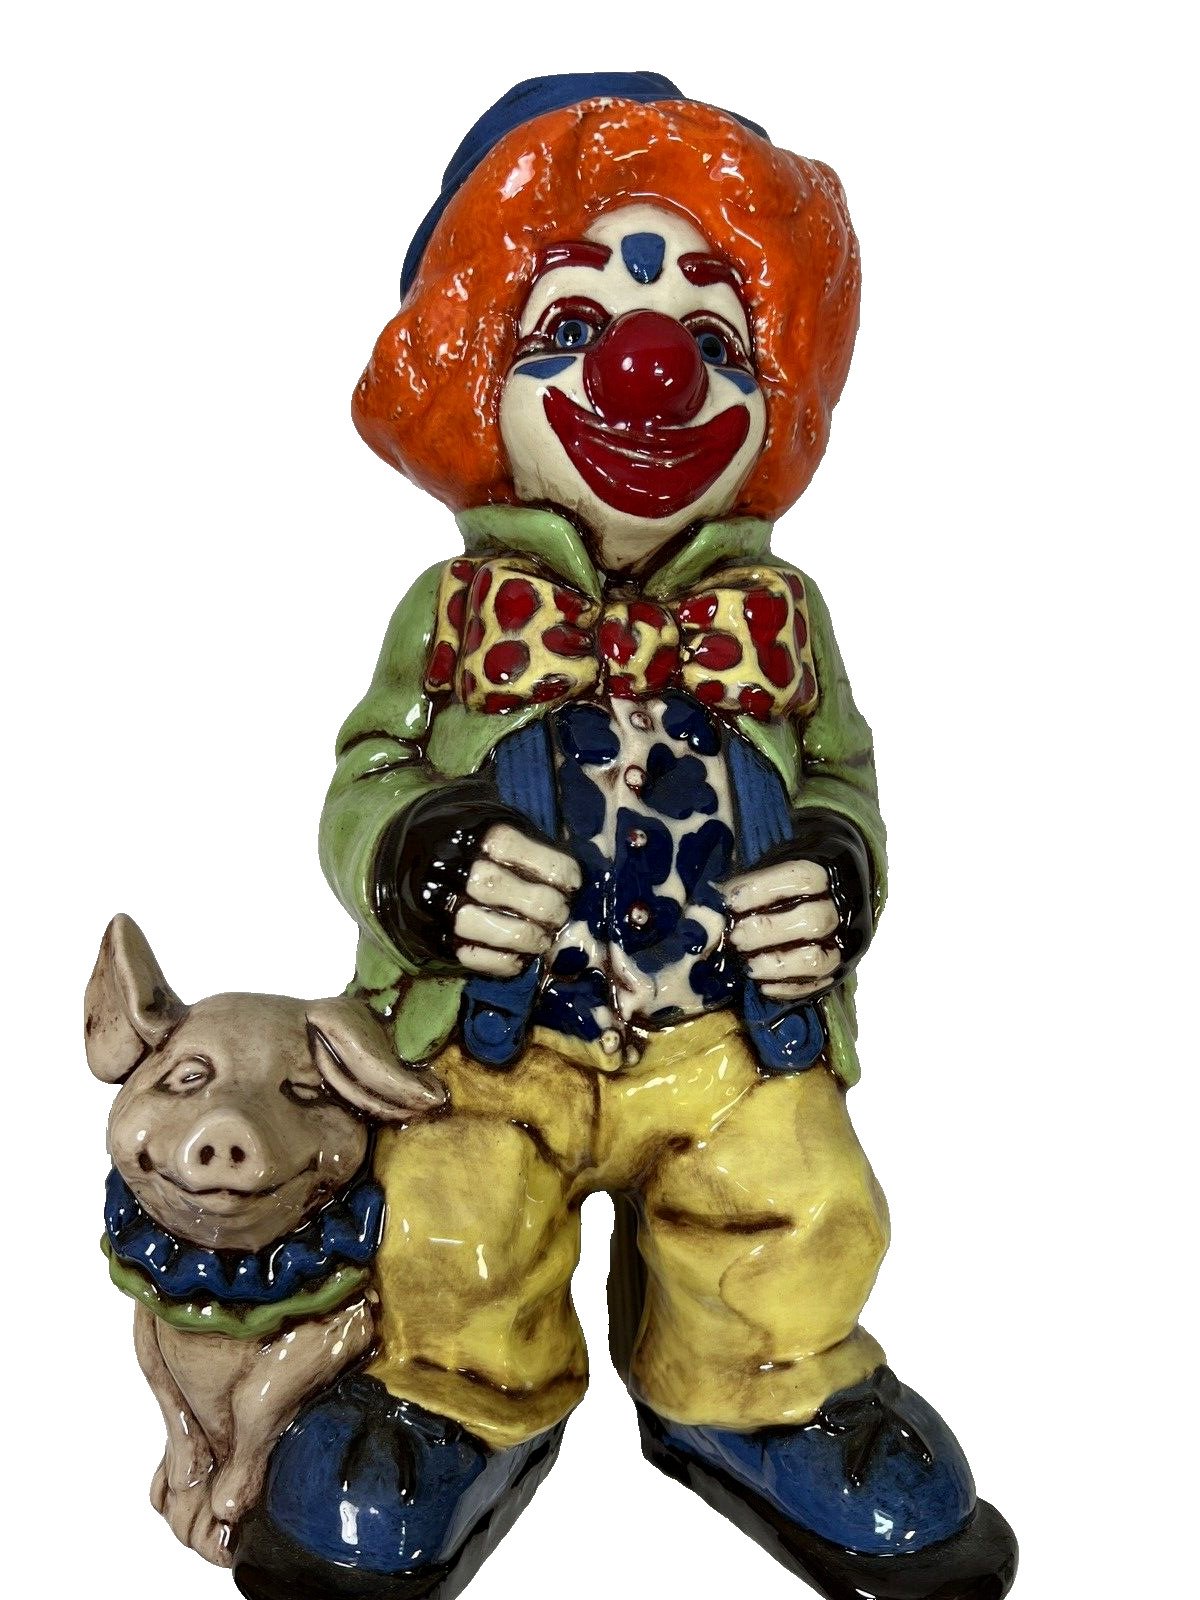 Vintage Handpainted Ceramic Clown Jokester Figurine with Snarky Pig Collectible